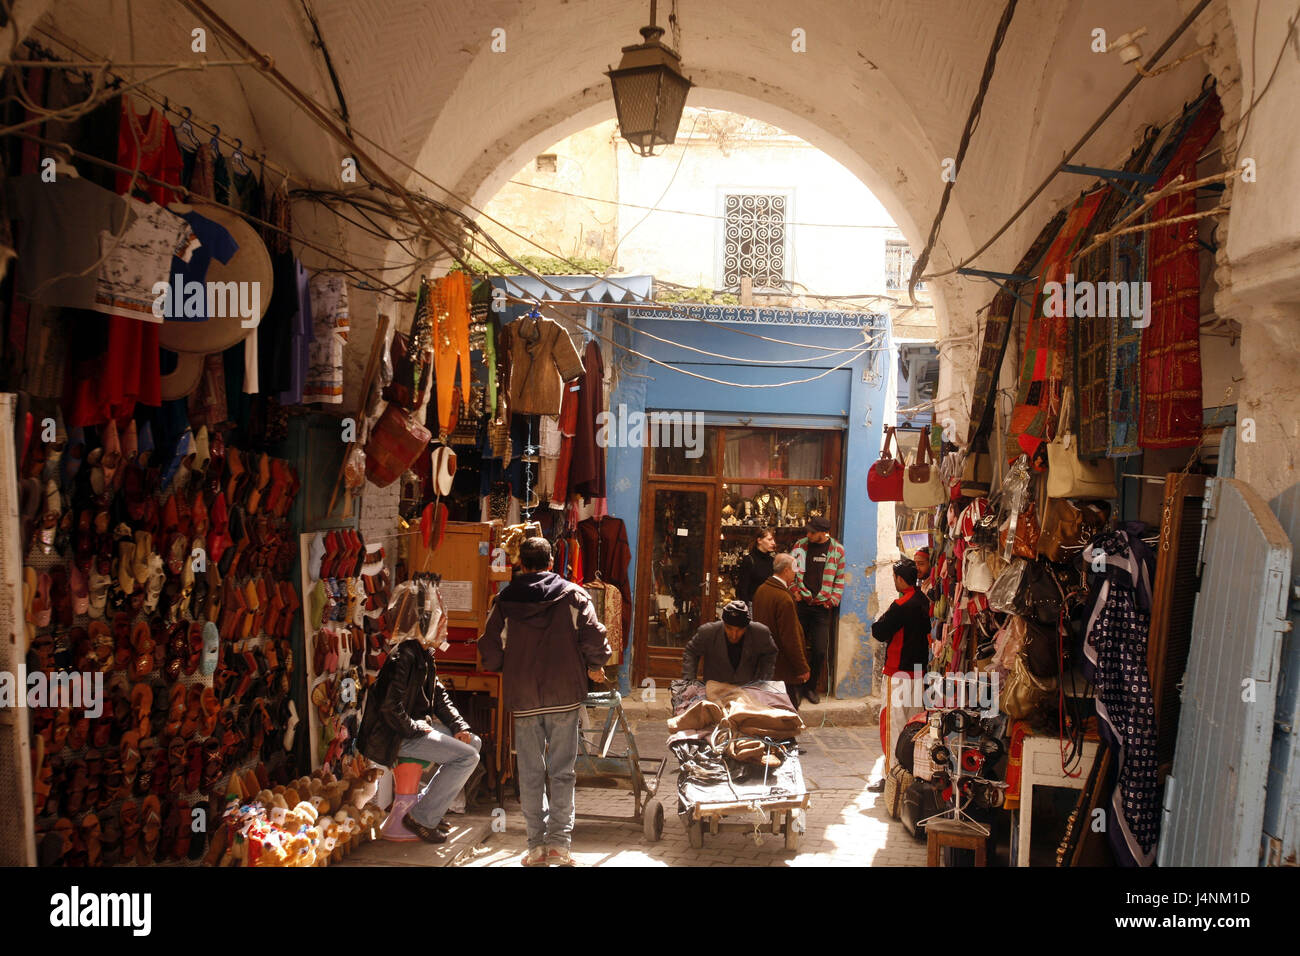 Tunisia, Tunis, Old Town, Souk, shops, passers-by, Stock Photo